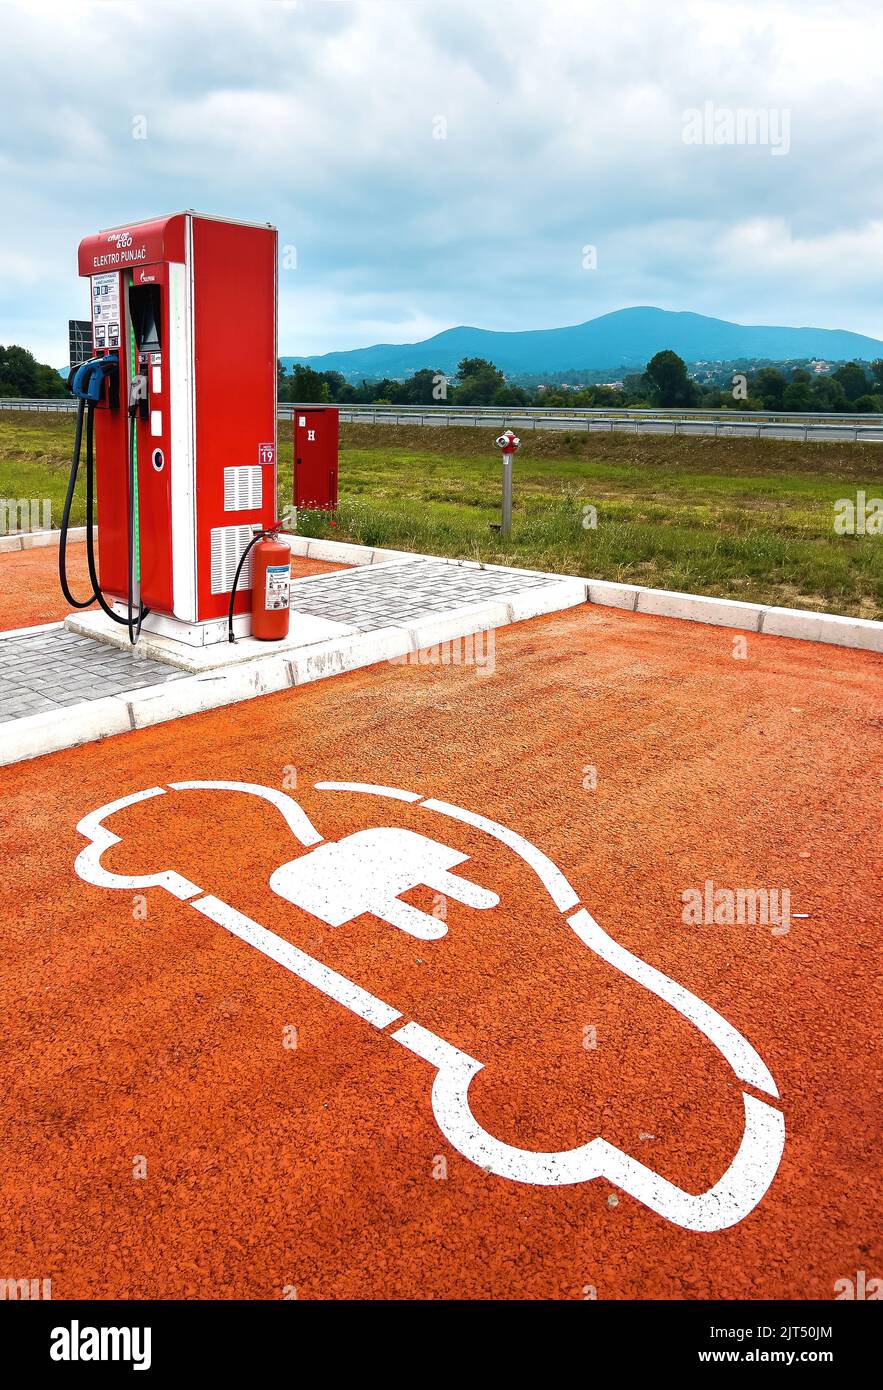 Cacak, Serbia - July 8, 2022: Electric car charging station at Gazprom Petrol station on Milos Veliki highway, editorial image Stock Photo